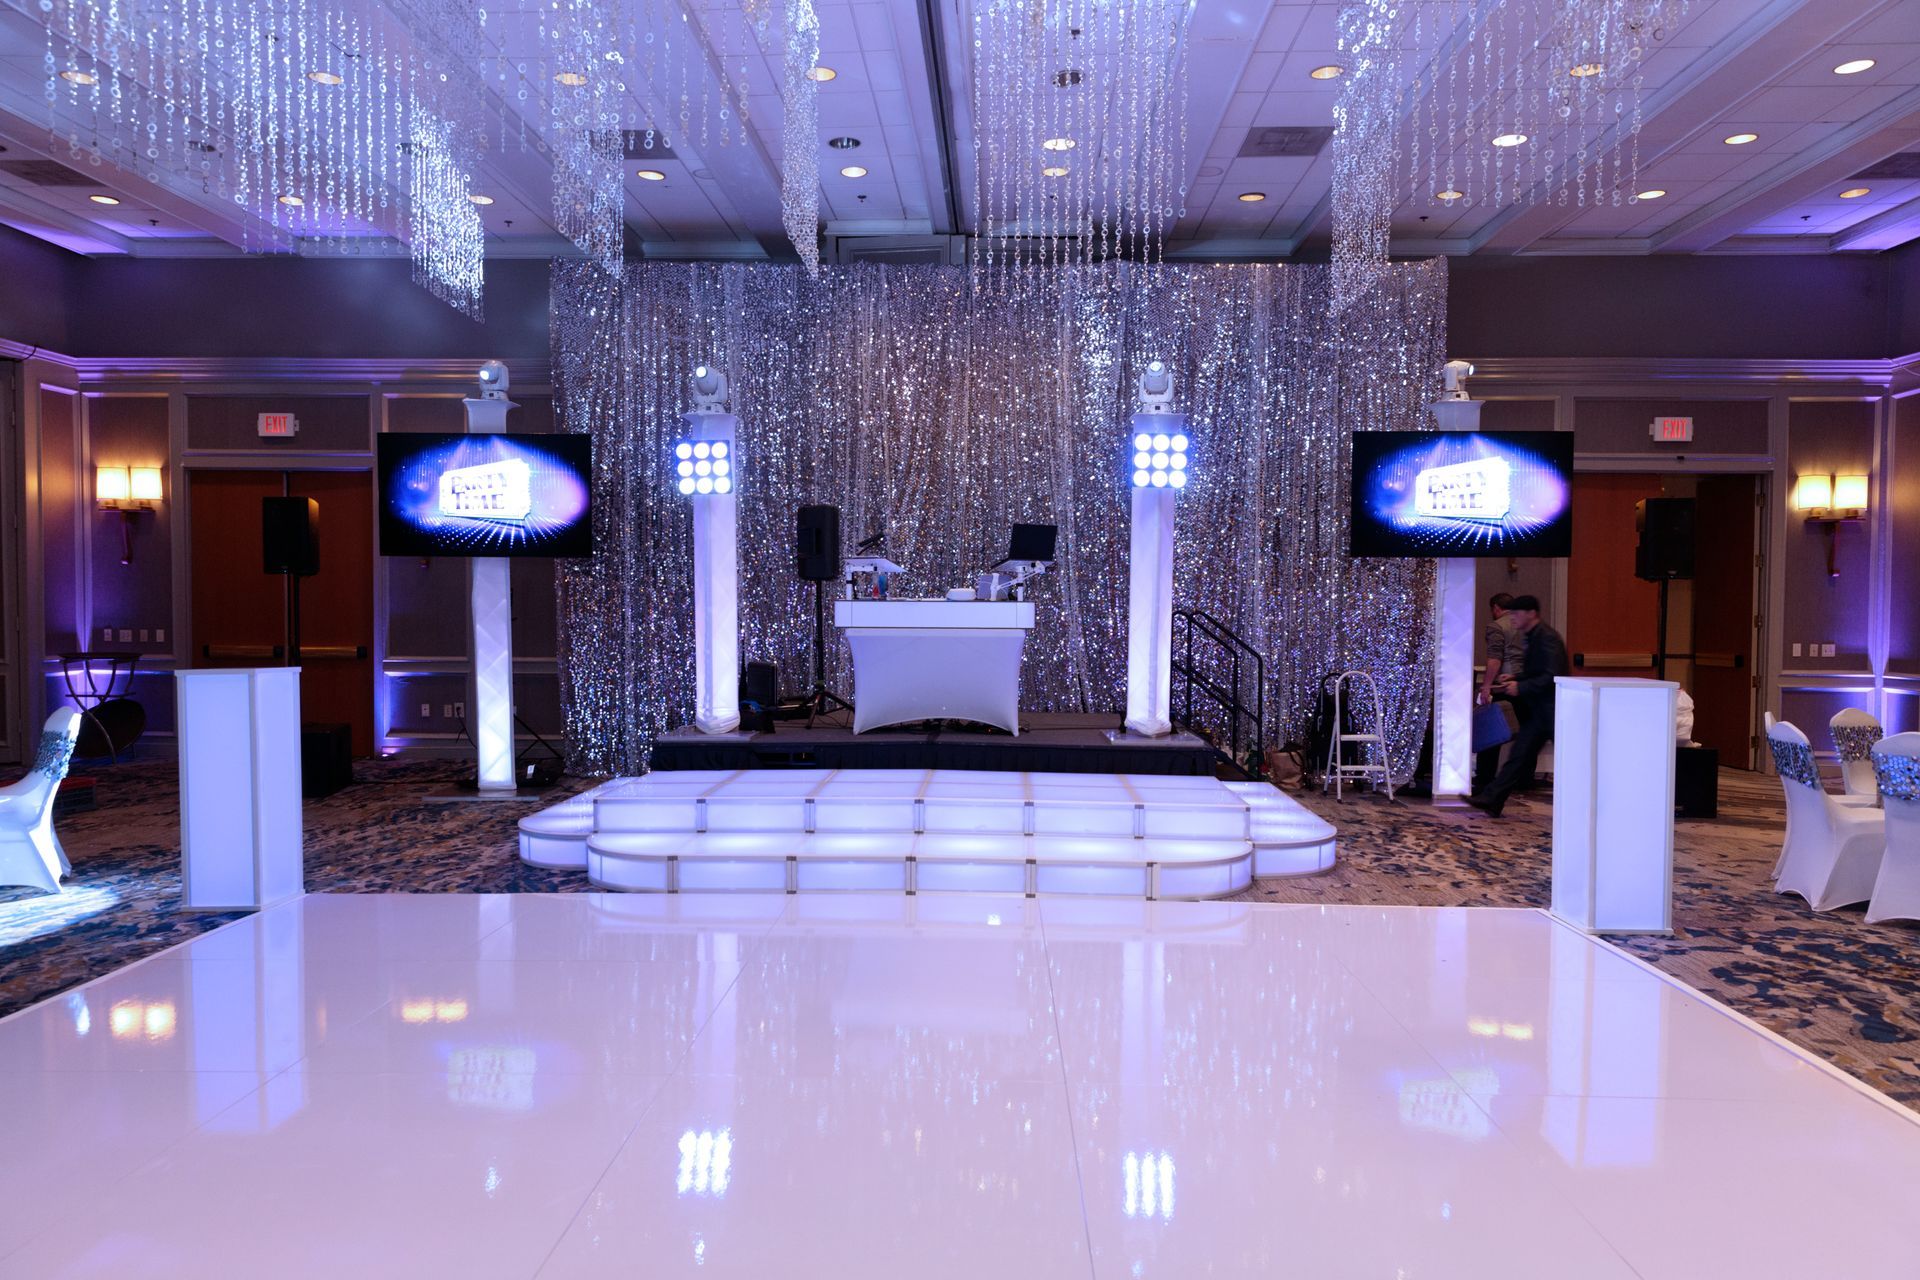 A large room with a dance floor and a dj set up